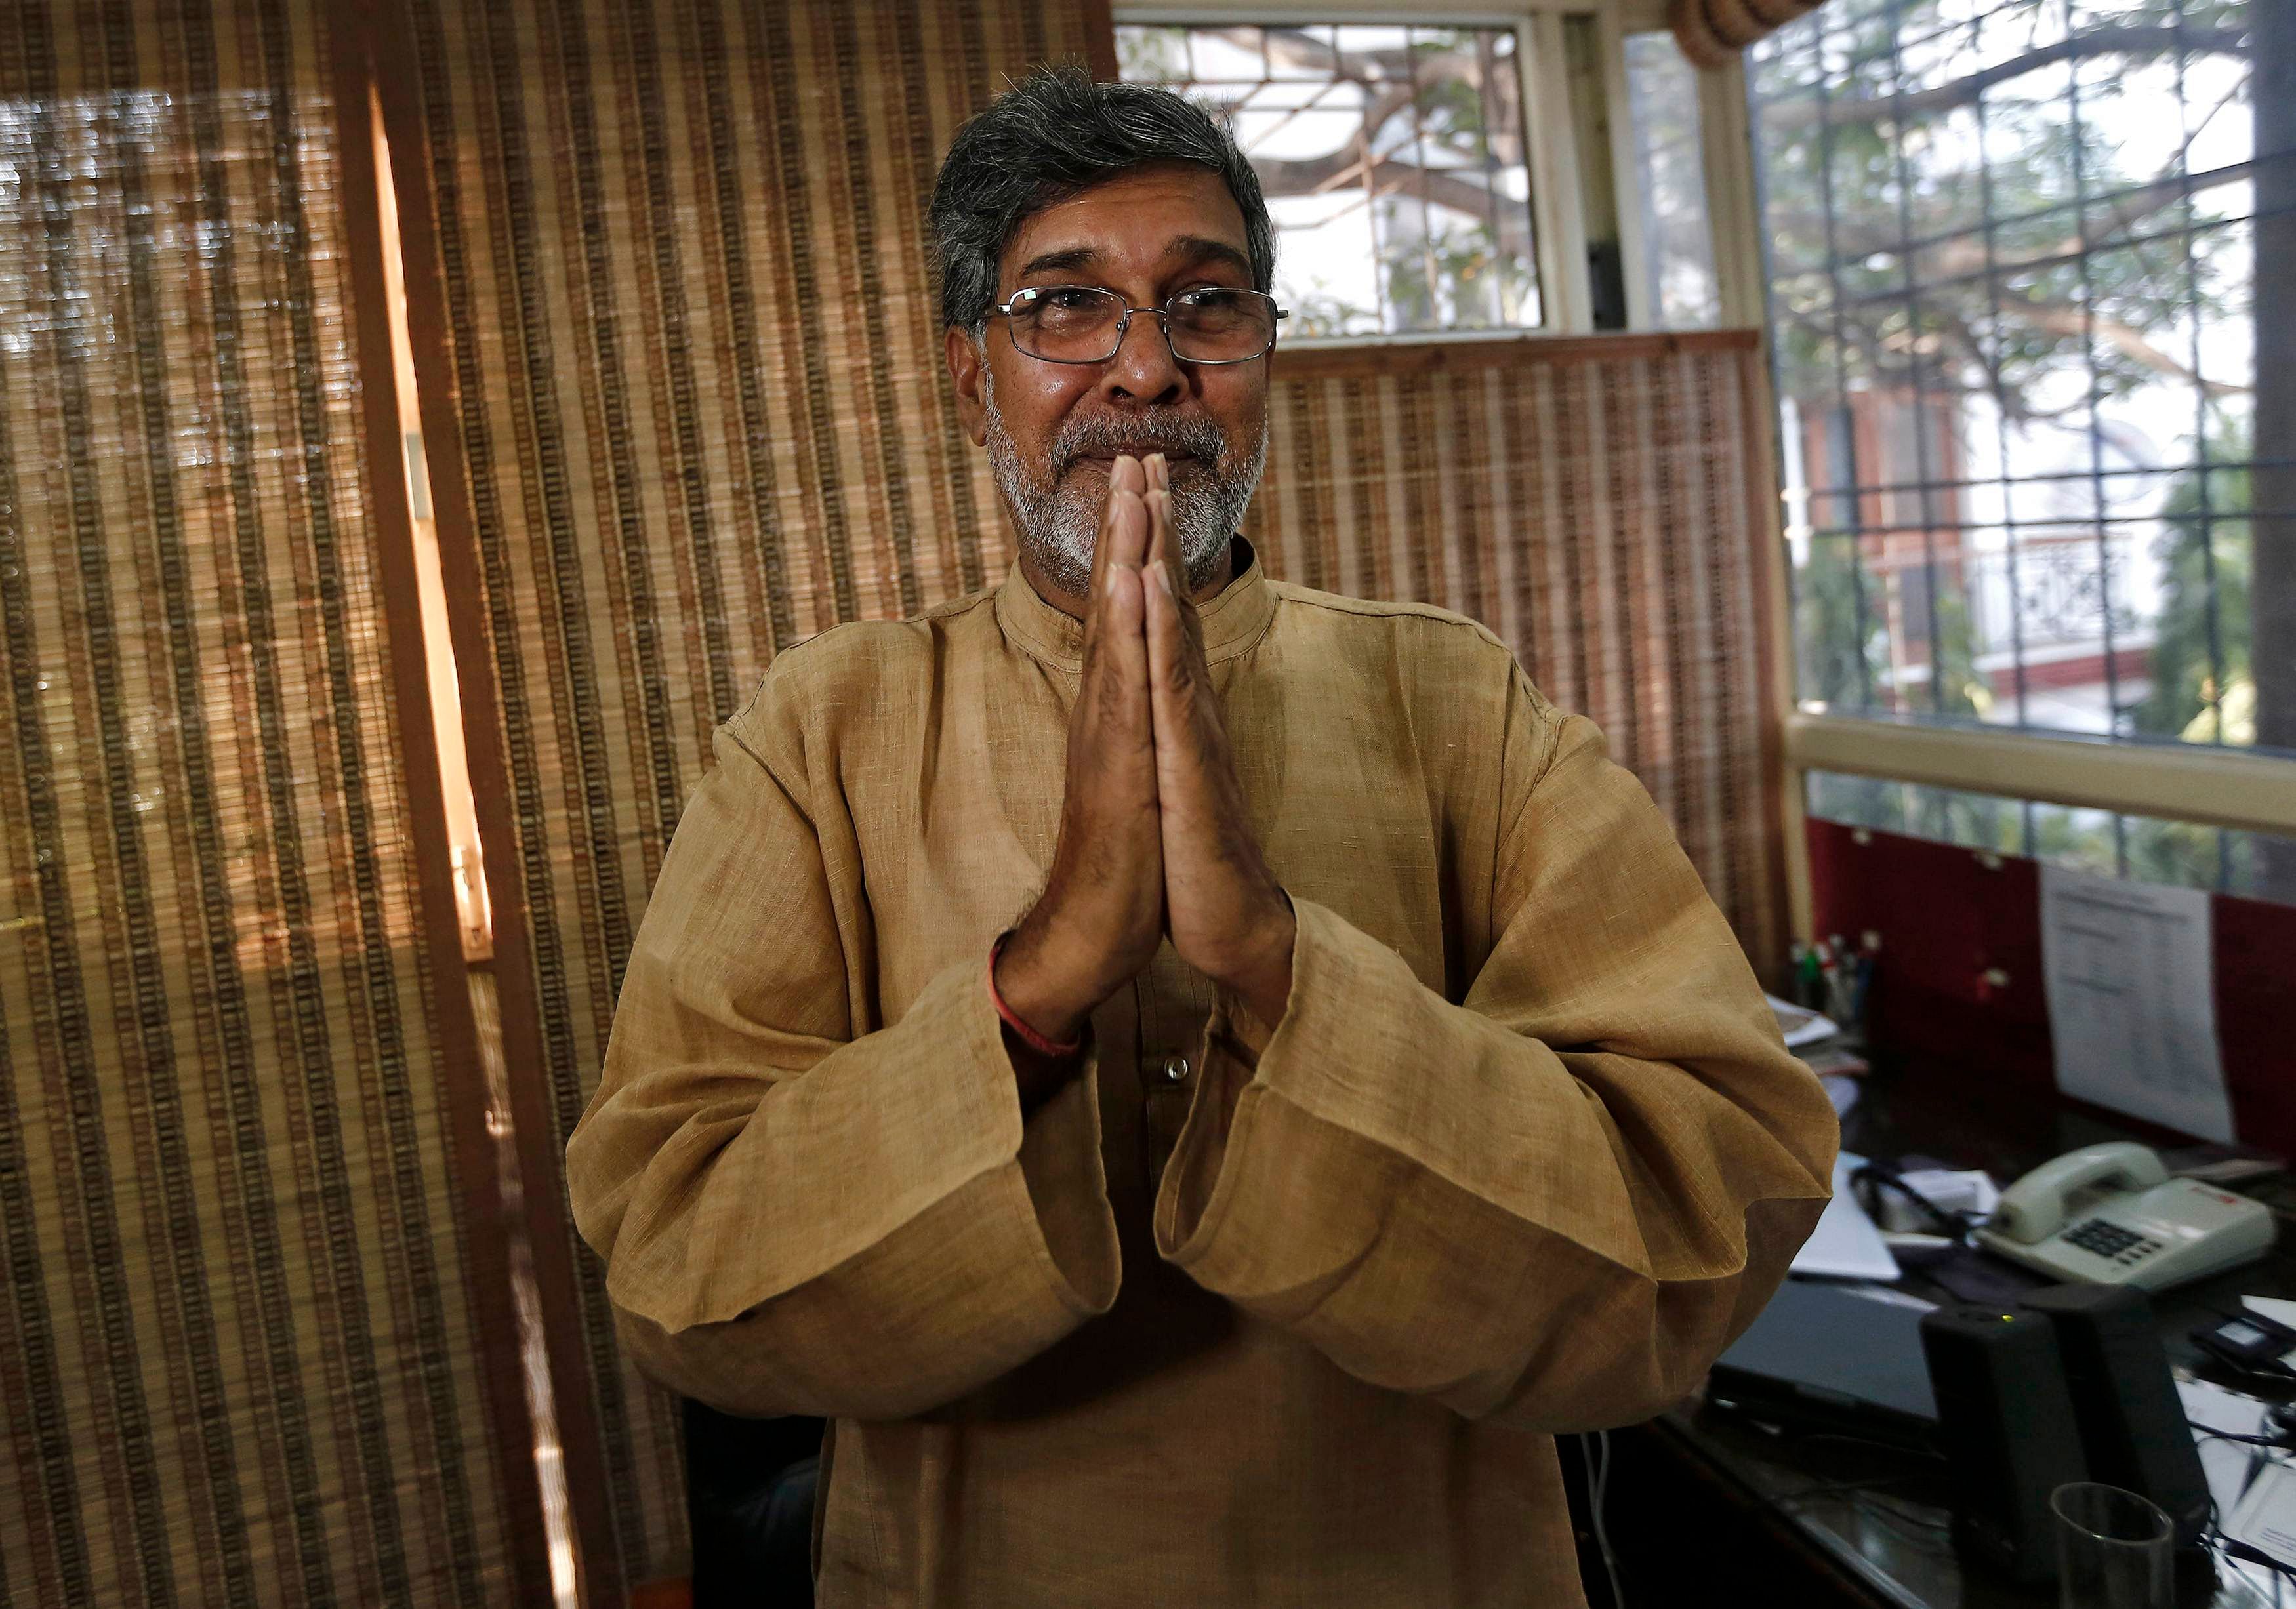 Minutes after Kailash Satyarthi's name was announced today as the winner of Nobel Peace Prize, the website of his NGO 'Bachpan Bachao Andolan' crashed due to heavy traffic while his name immediately started to trend on Twitter worldwide. Reuters photo